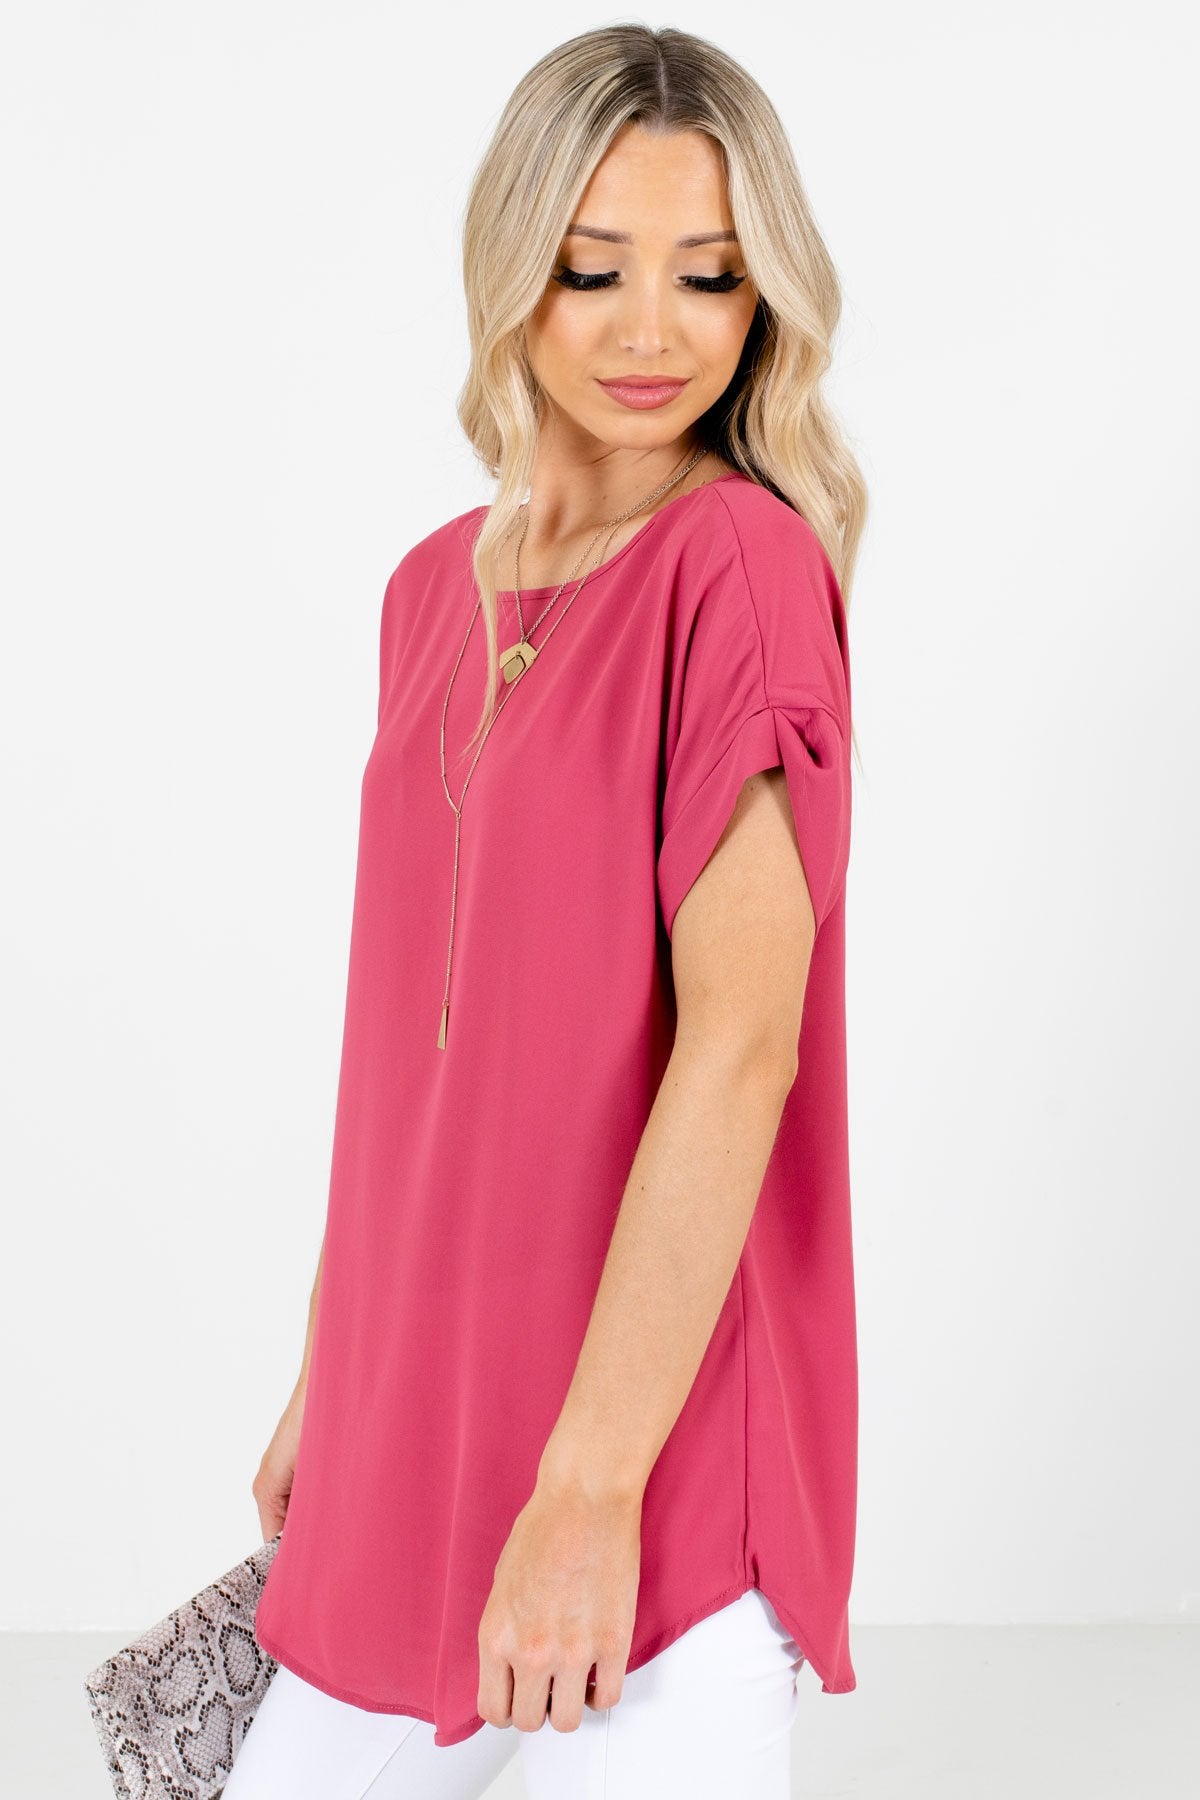 Rose Pink Layering Boutique Blouses for Women